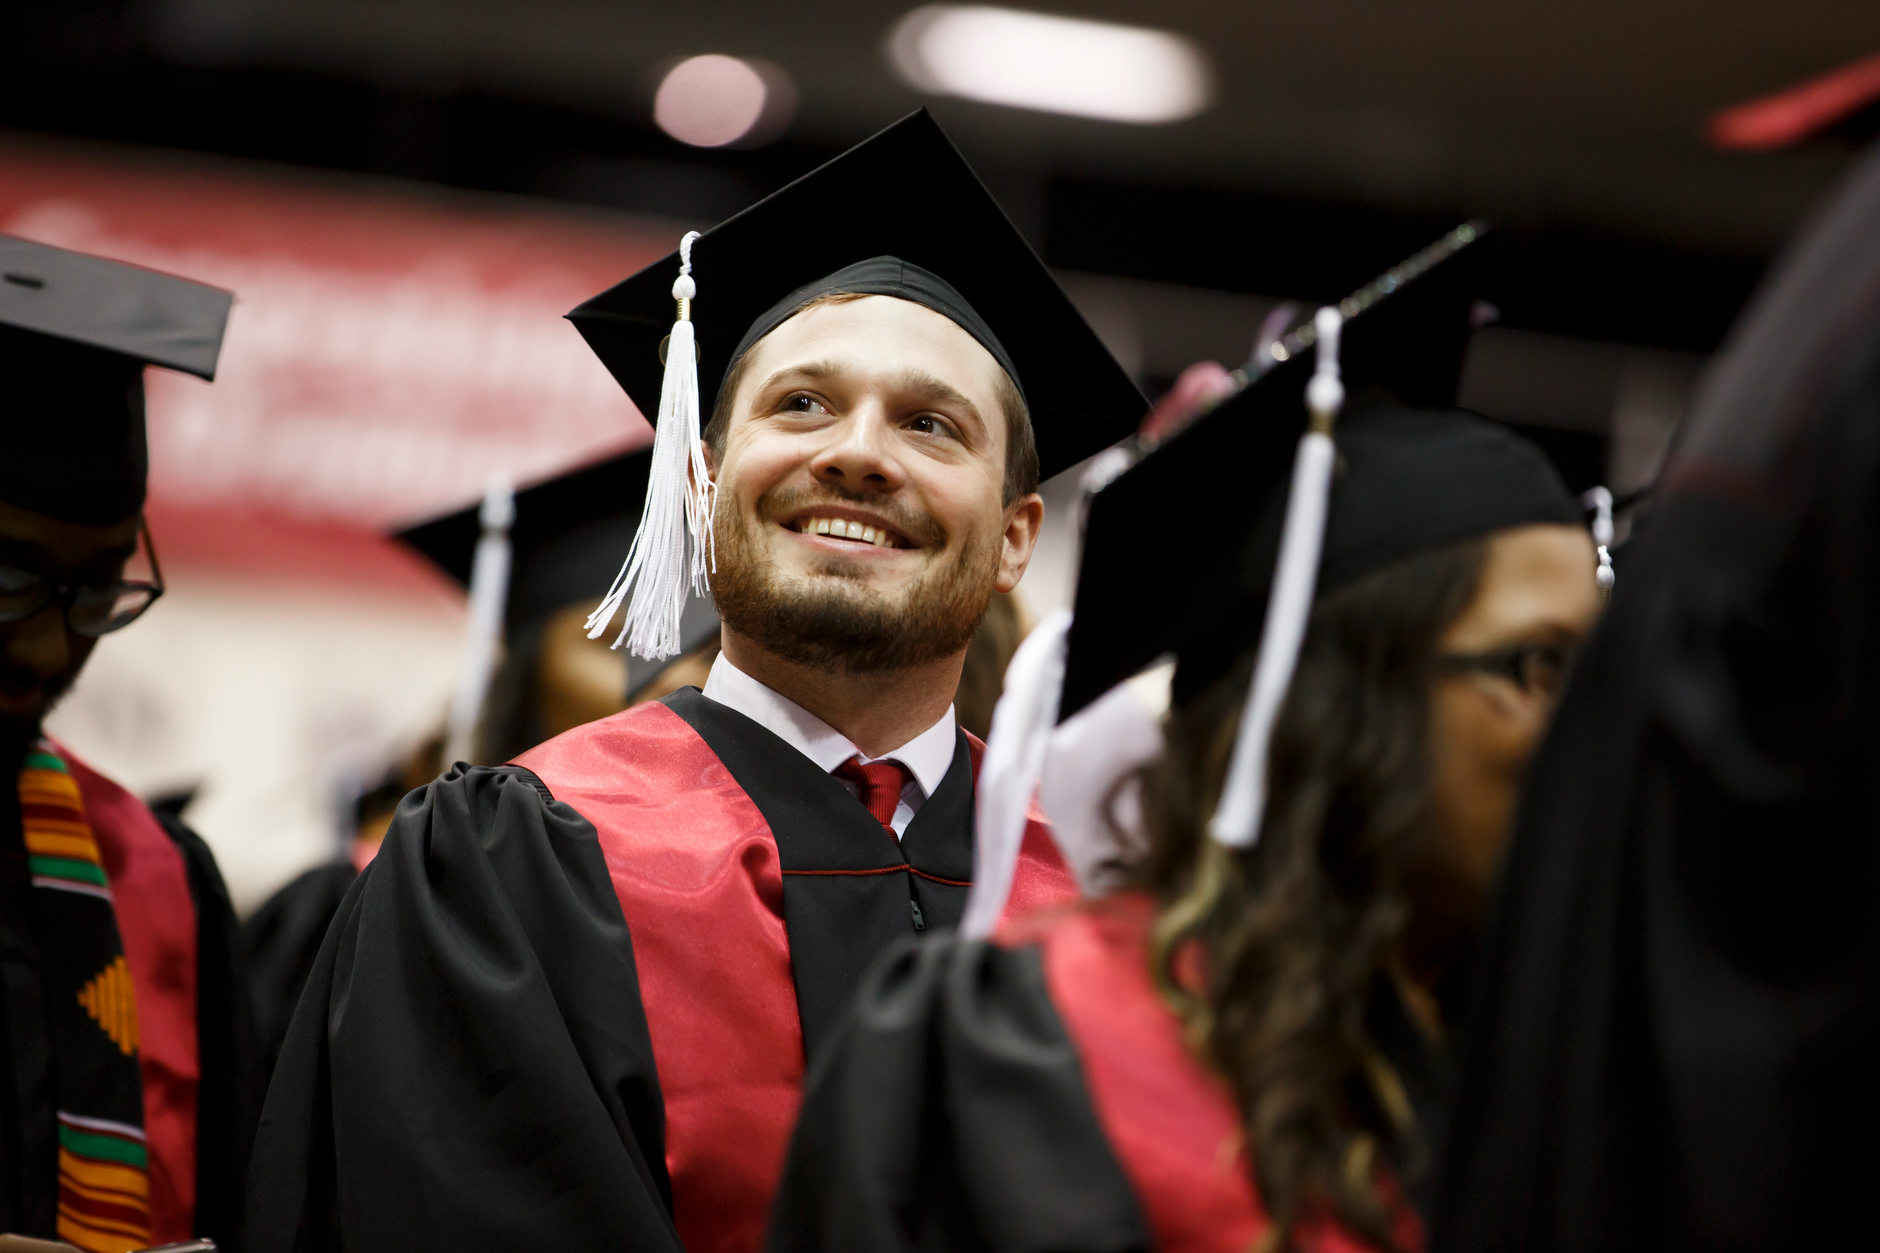 A graduate smiles before the start of the Indiana University Northwest Commencement at the Genesis Convention Center on Thursday, May 9, 2019. (James Brosher/Indiana University)